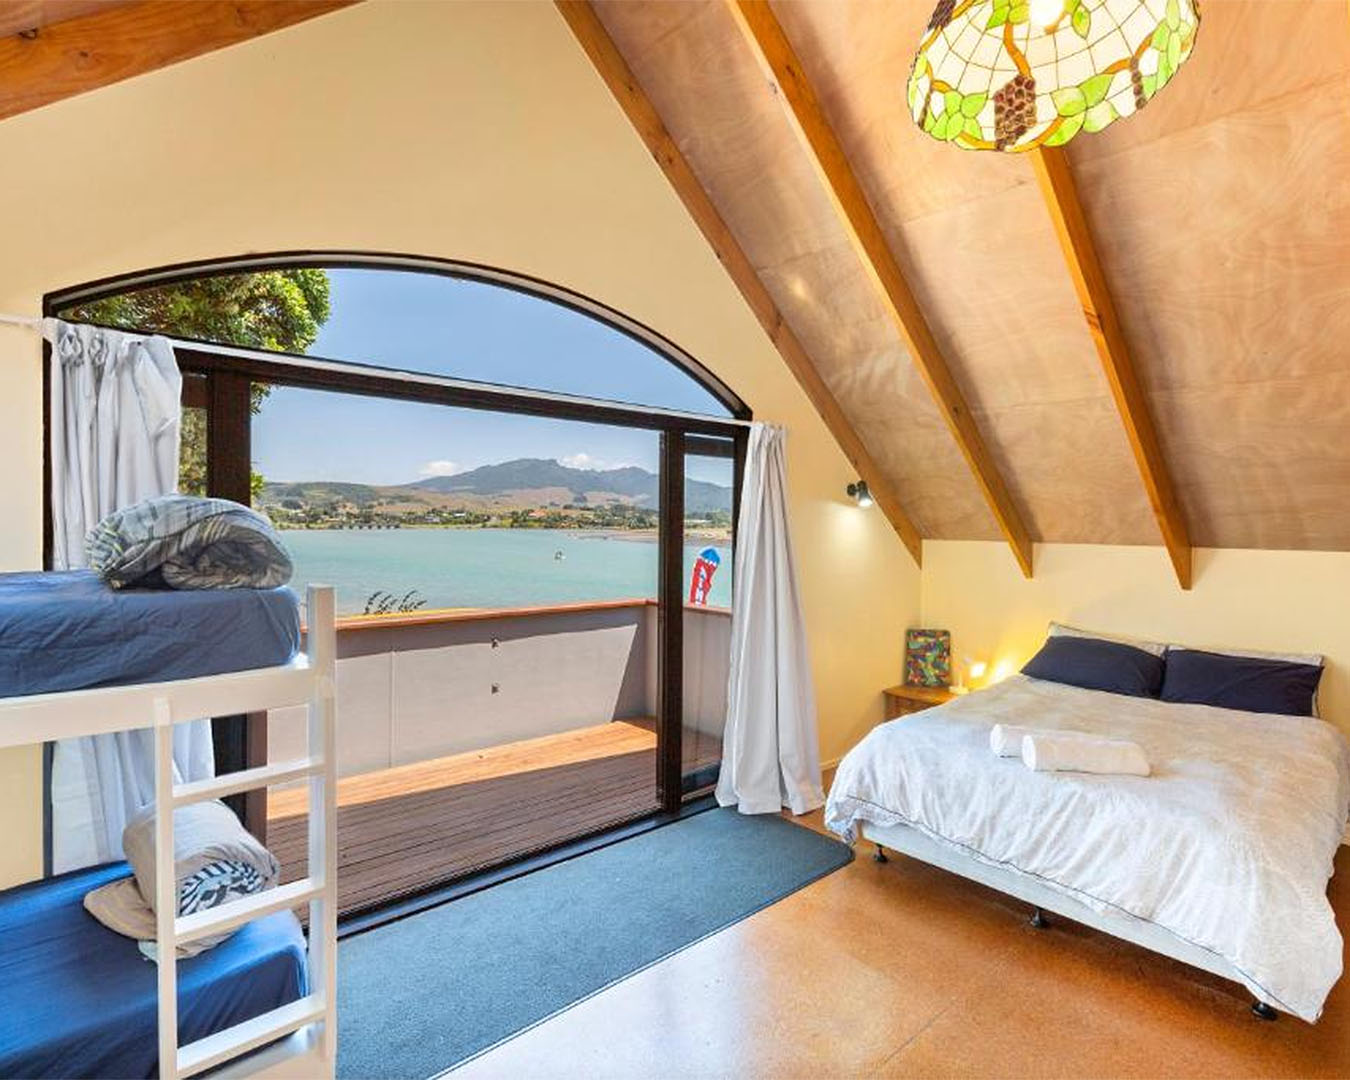 The interior of a well appointed room shows a window looking out to the sea with three beds.